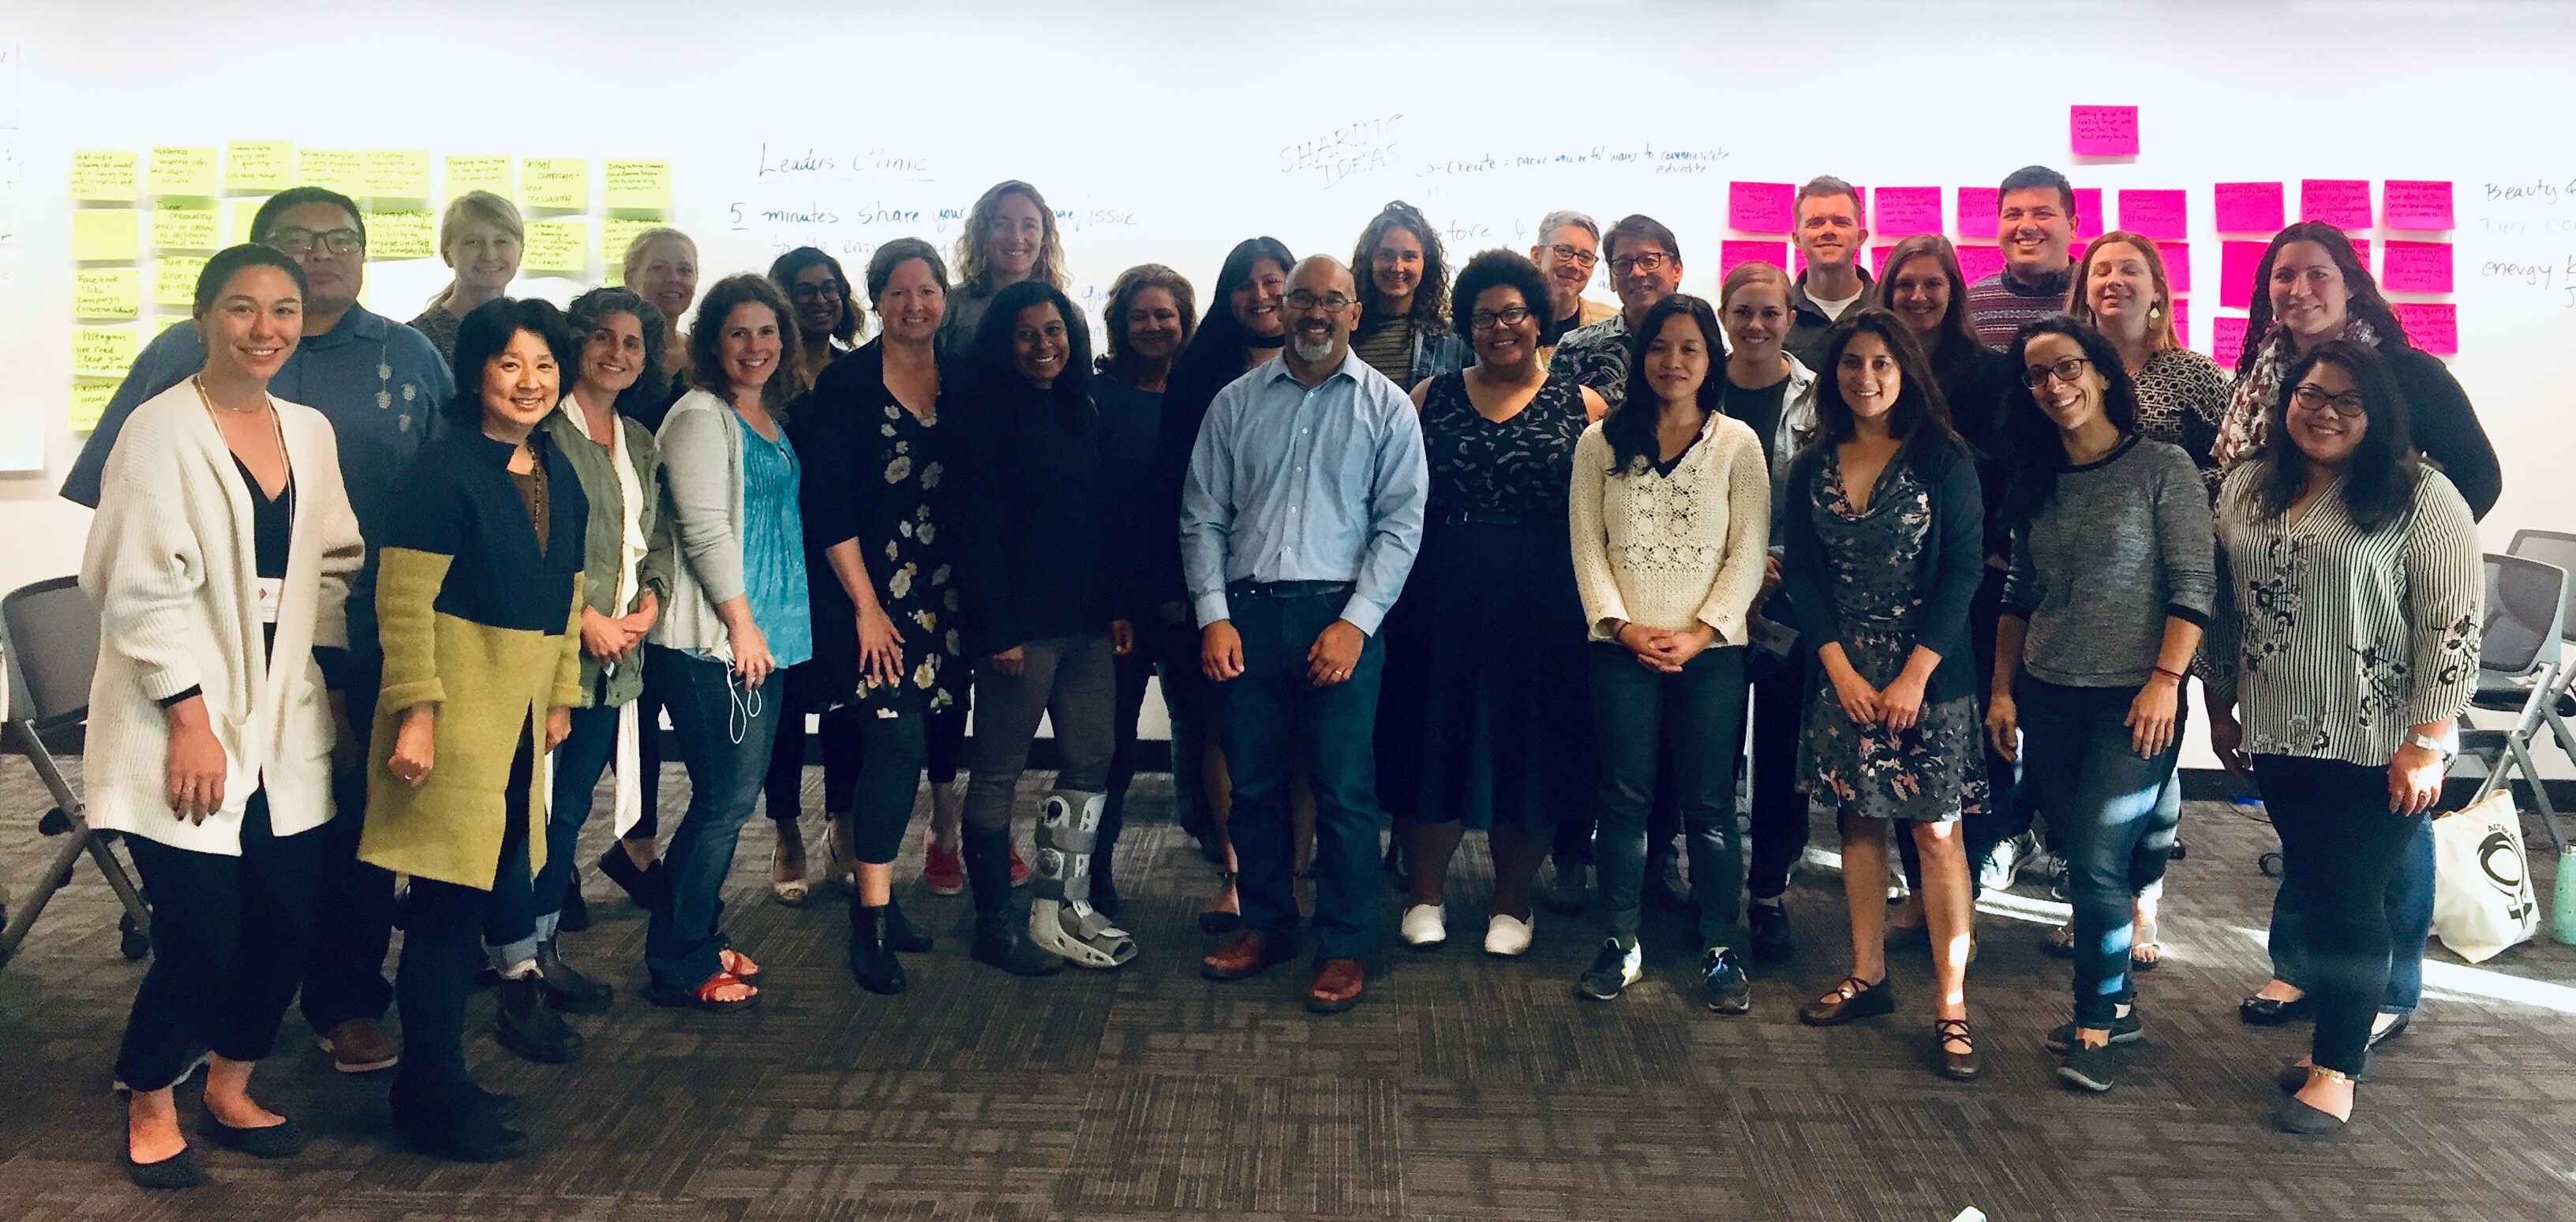 The 2018 Fundraising Bright Spots cohort stands smiling in front of a dry erase board with lots of colorful sticky notes on it.